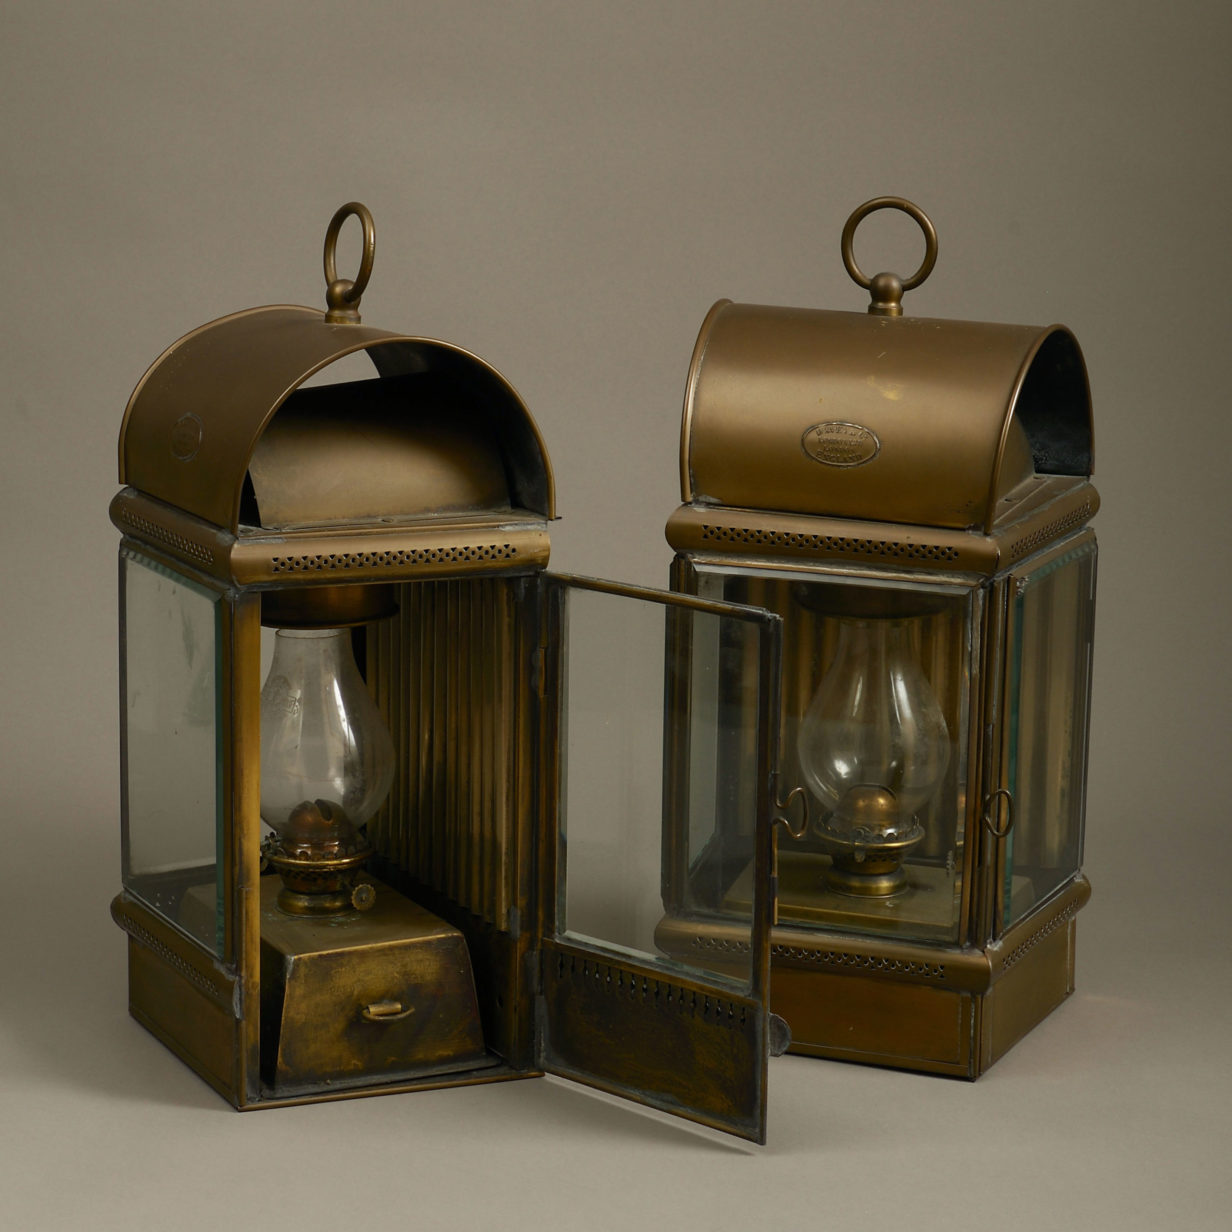 Late 19th century pair of wall lanterns by davy & co.